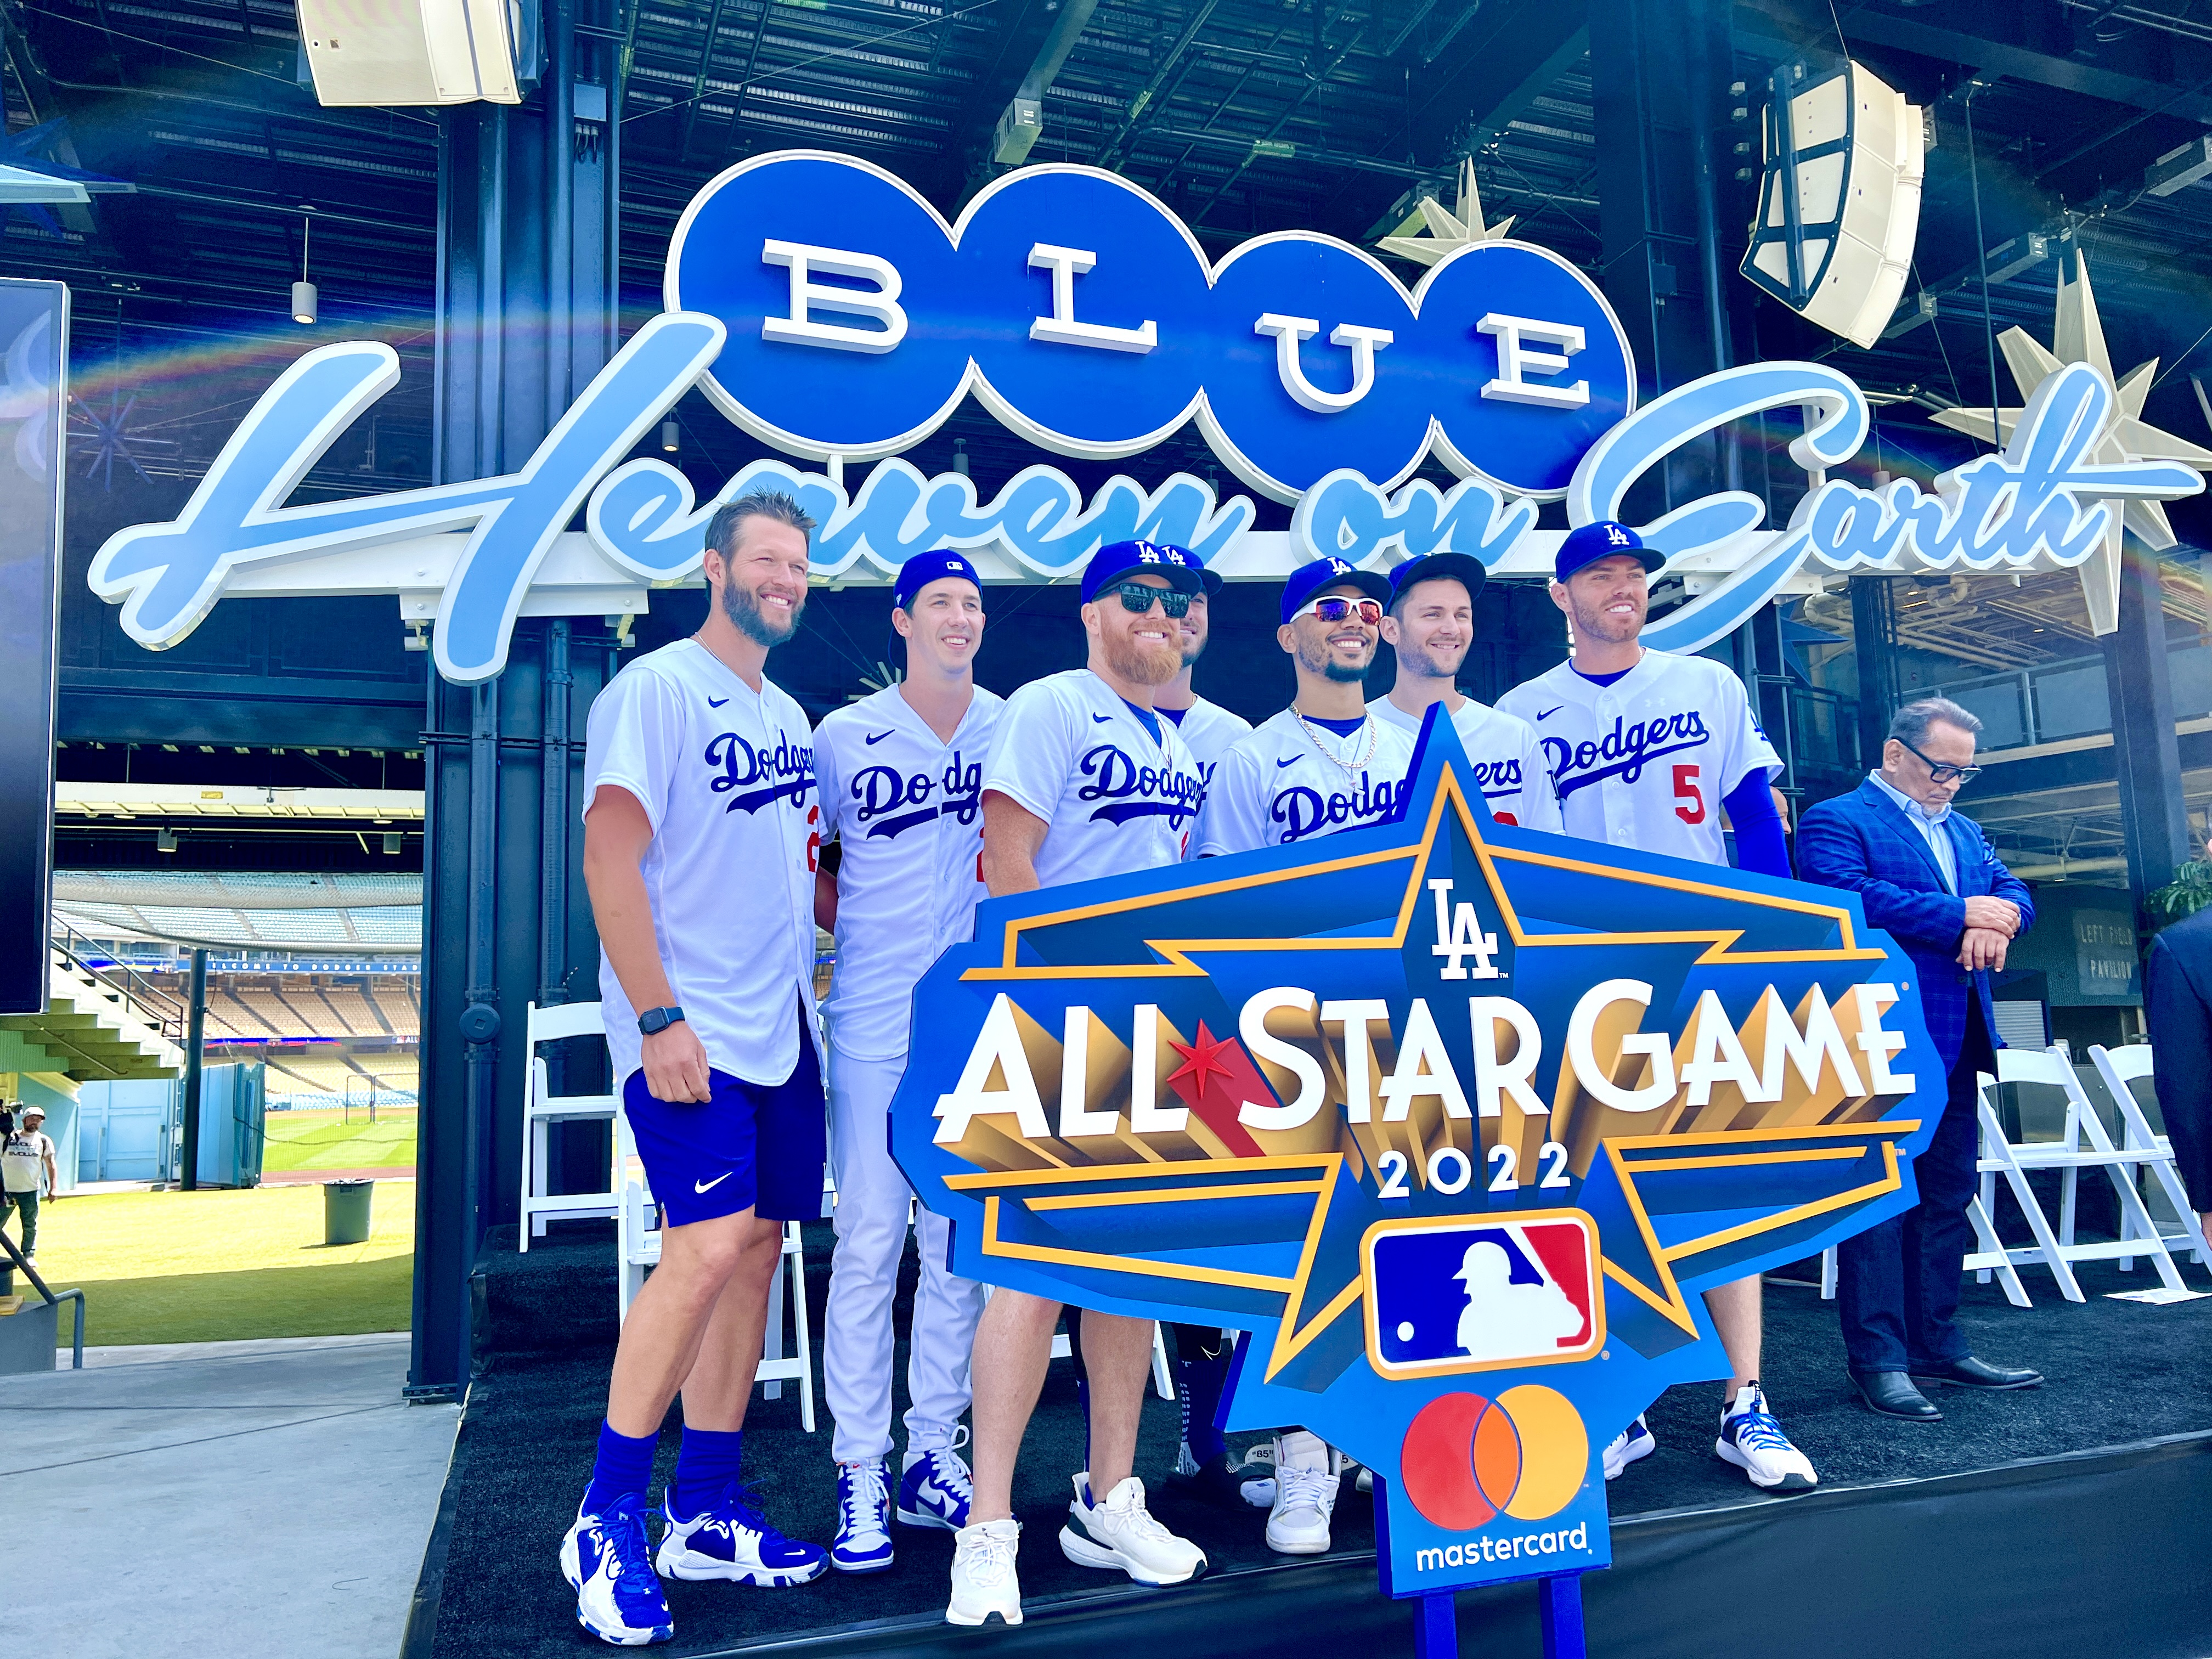 Here Are the Latino Players Taking Center Stage At MLB All-Star Game